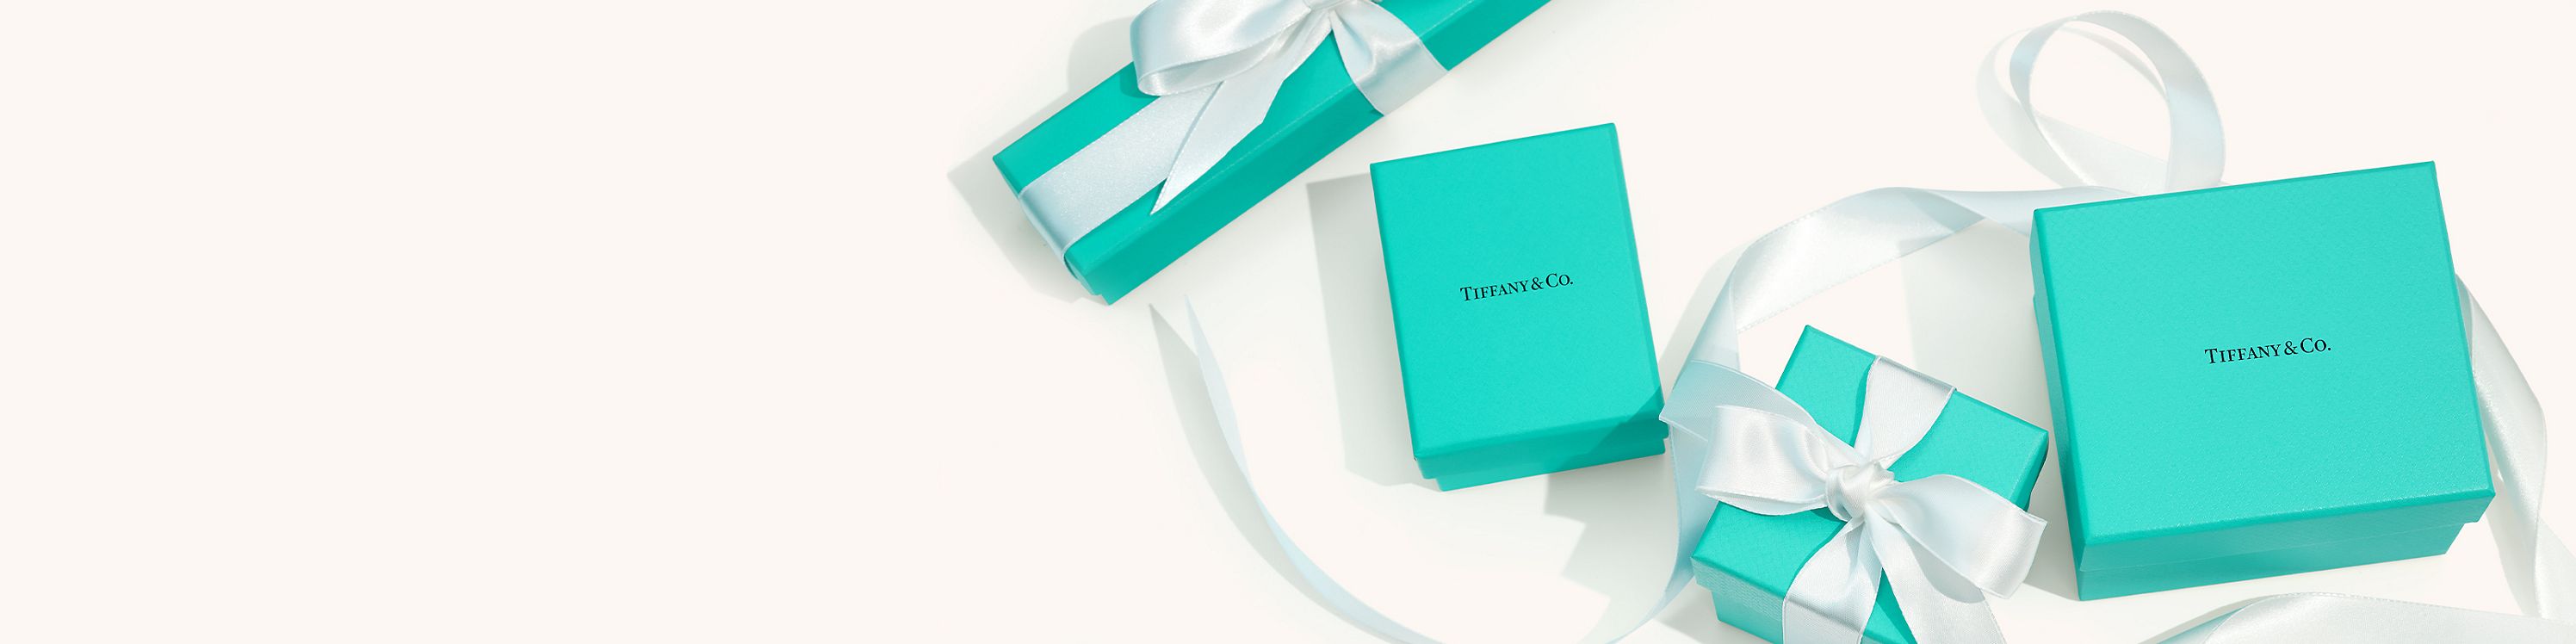 Tiffany & Co. Gifts Under $500